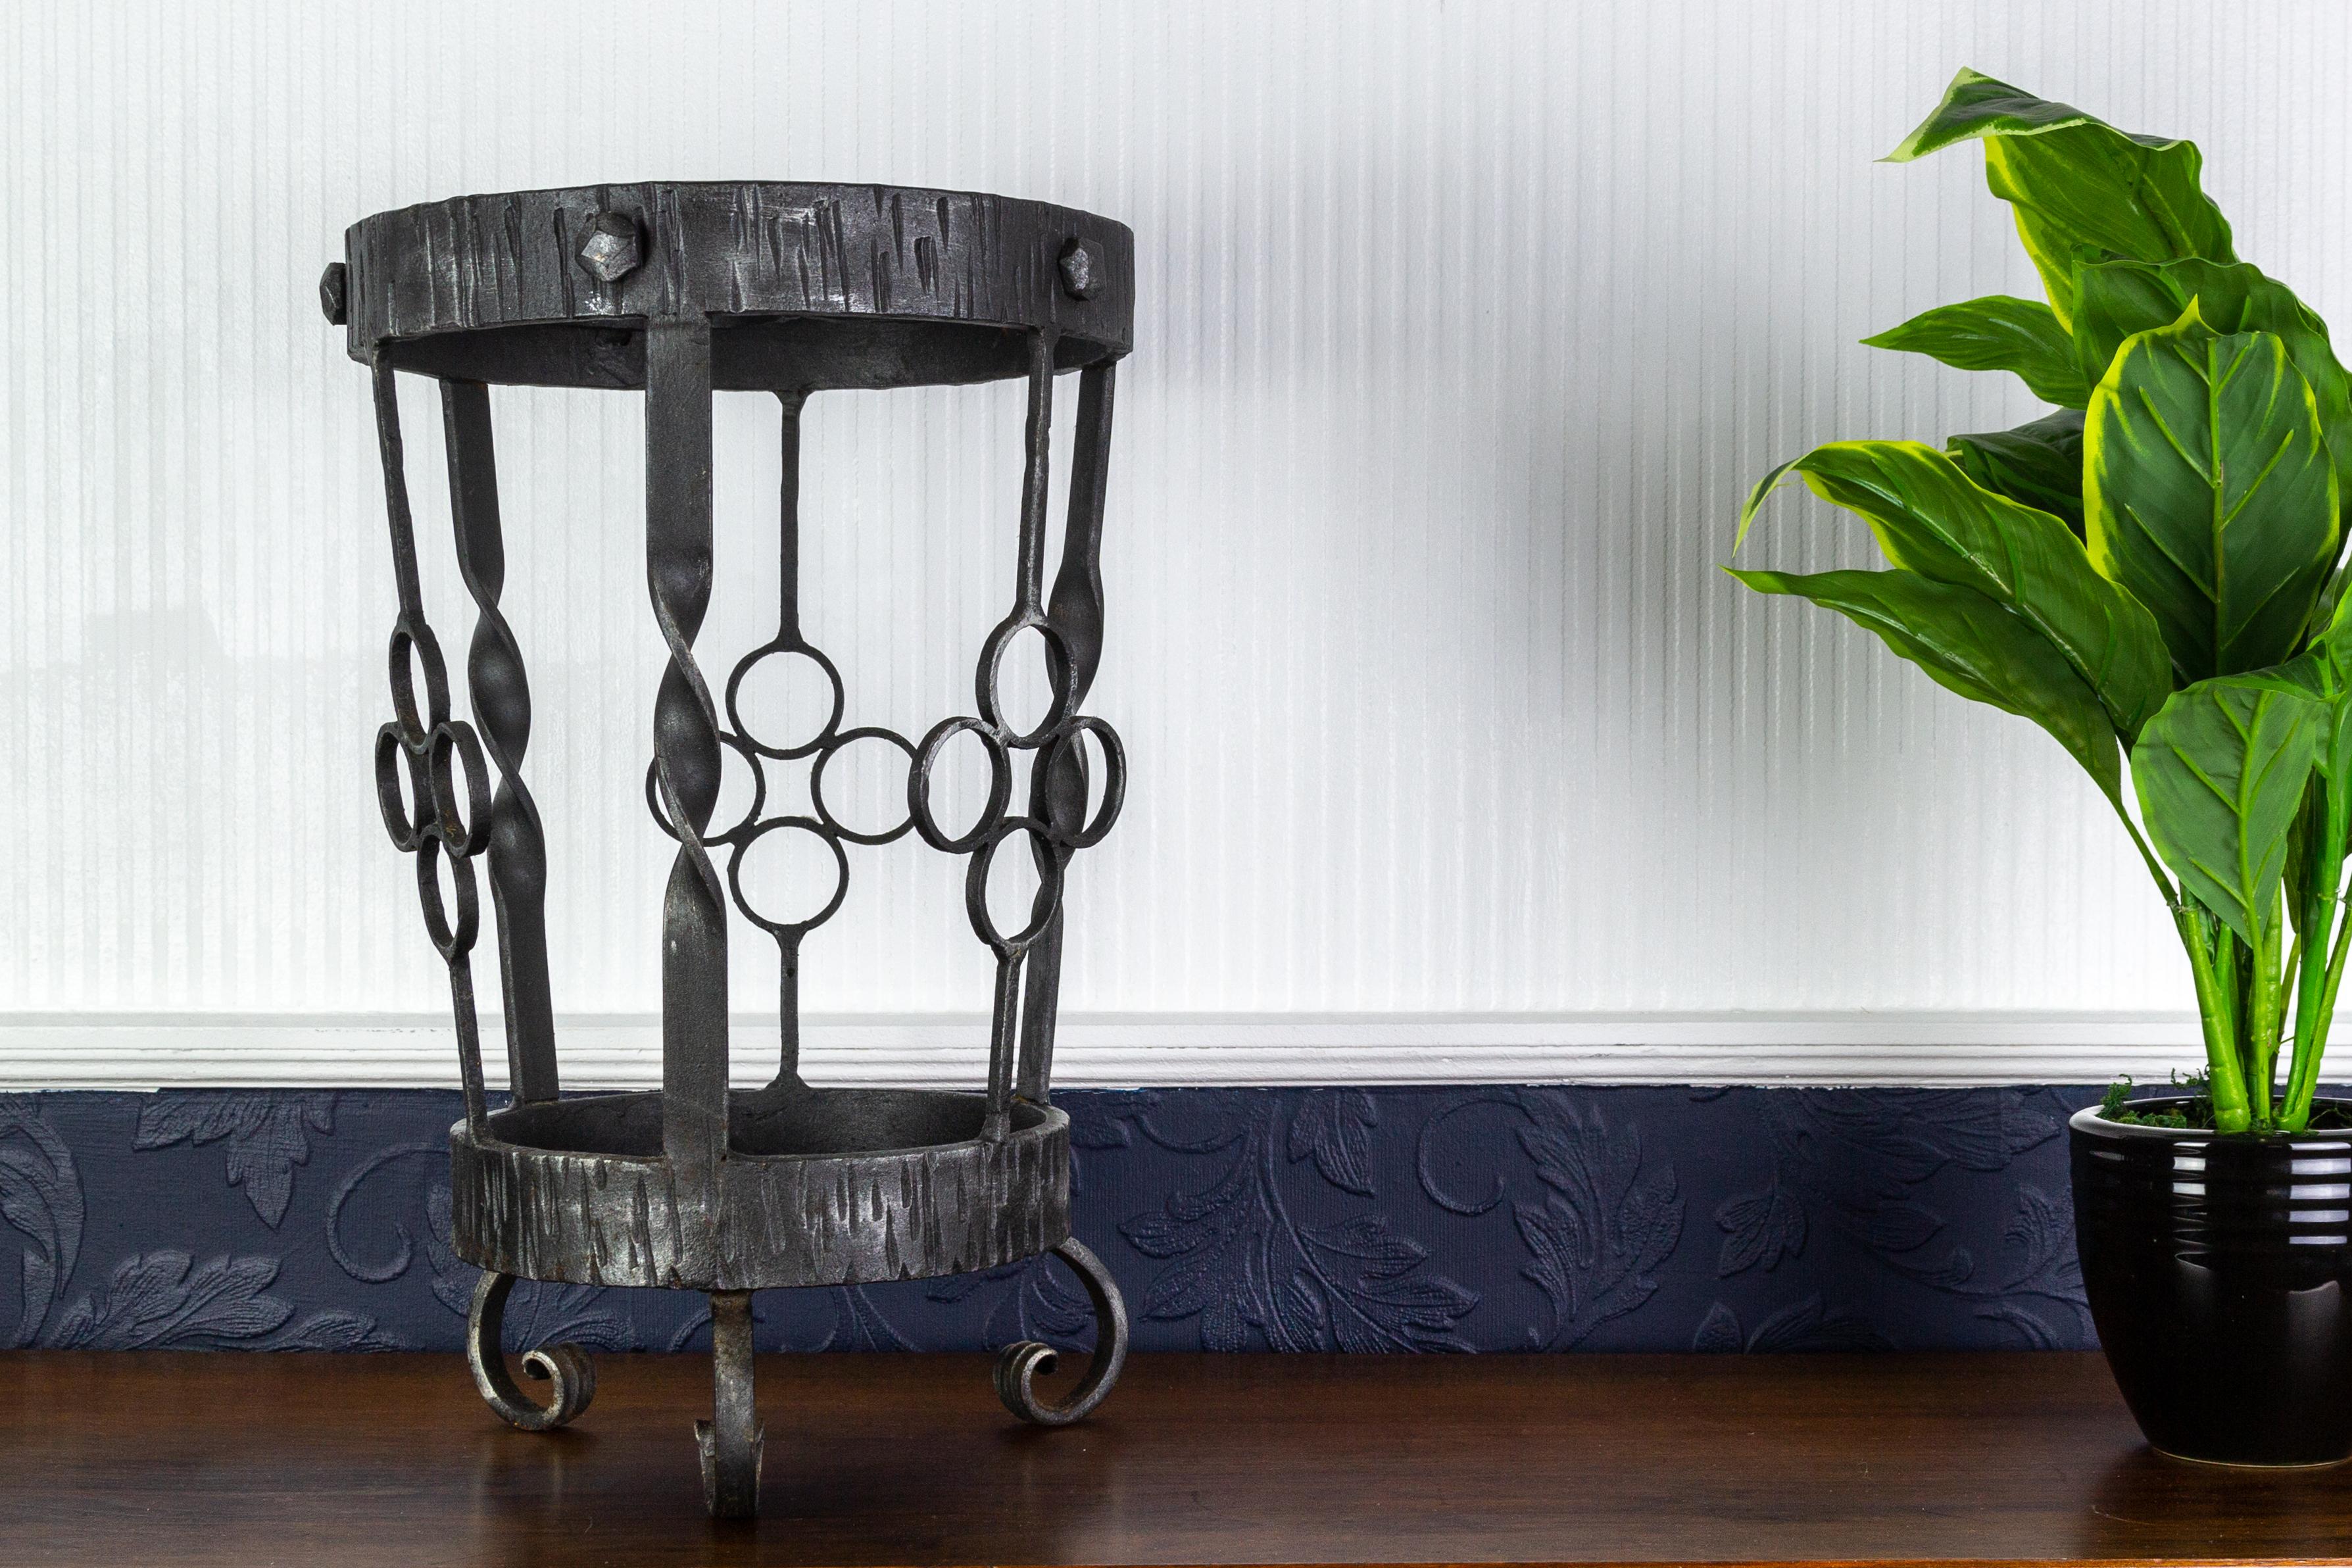 Vintage Art Deco Style Wrought Iron Umbrella Stand or Cane Holder For Sale 7